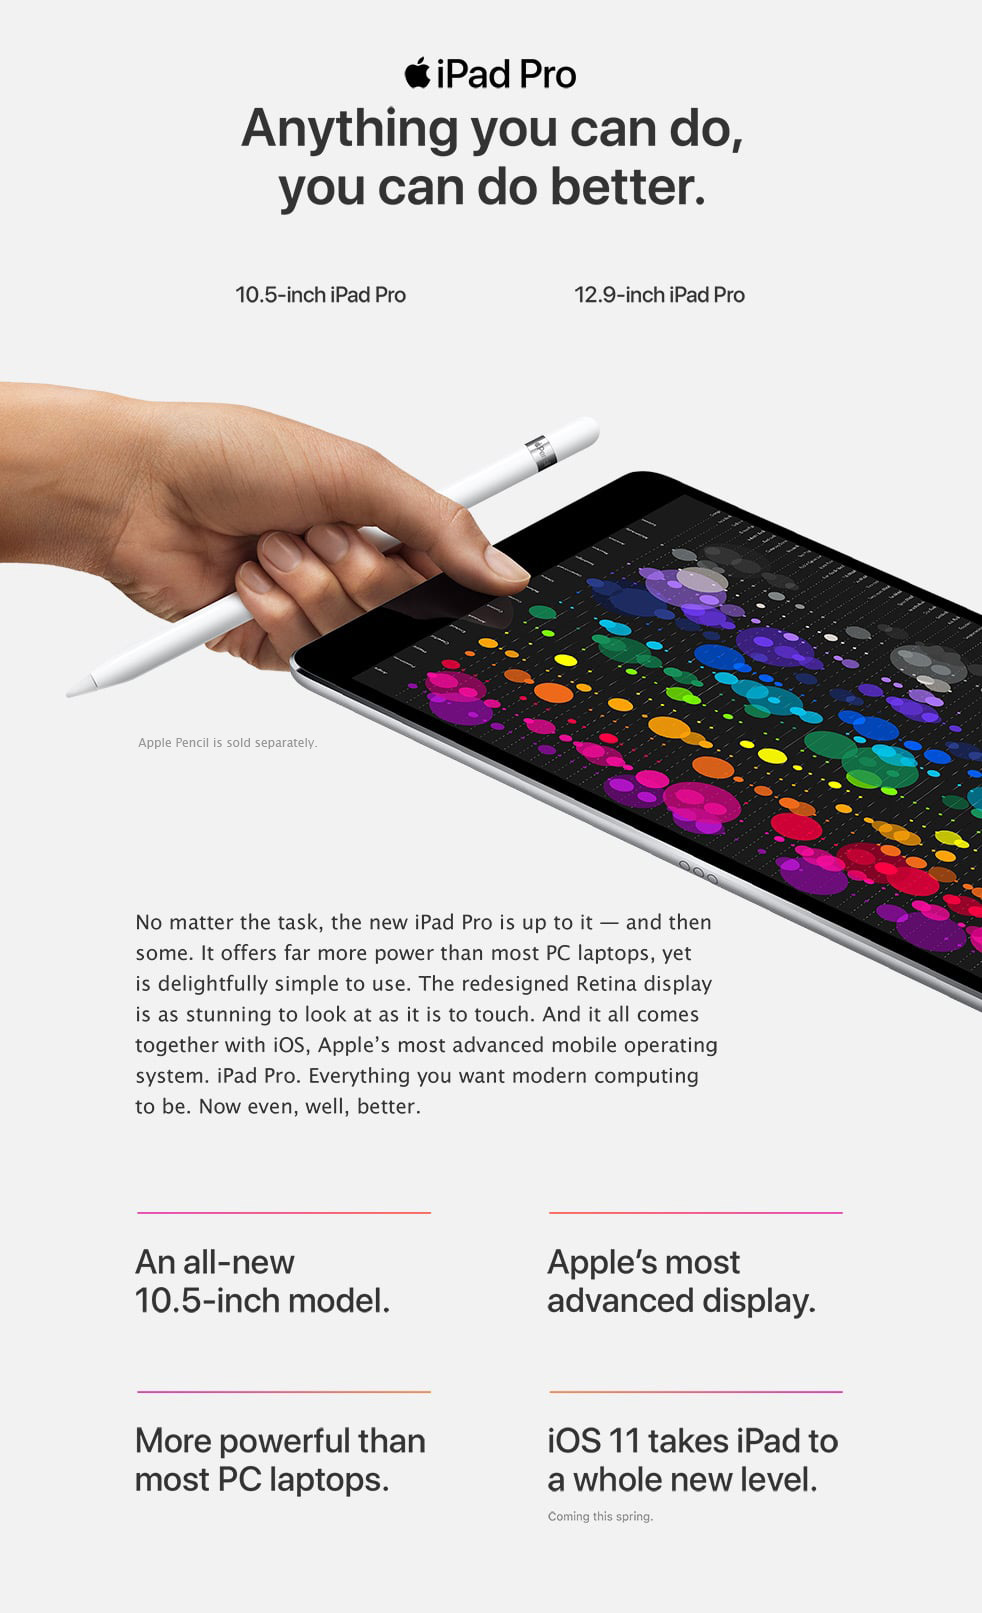 iPad Pro - Anything you can do, you can do better